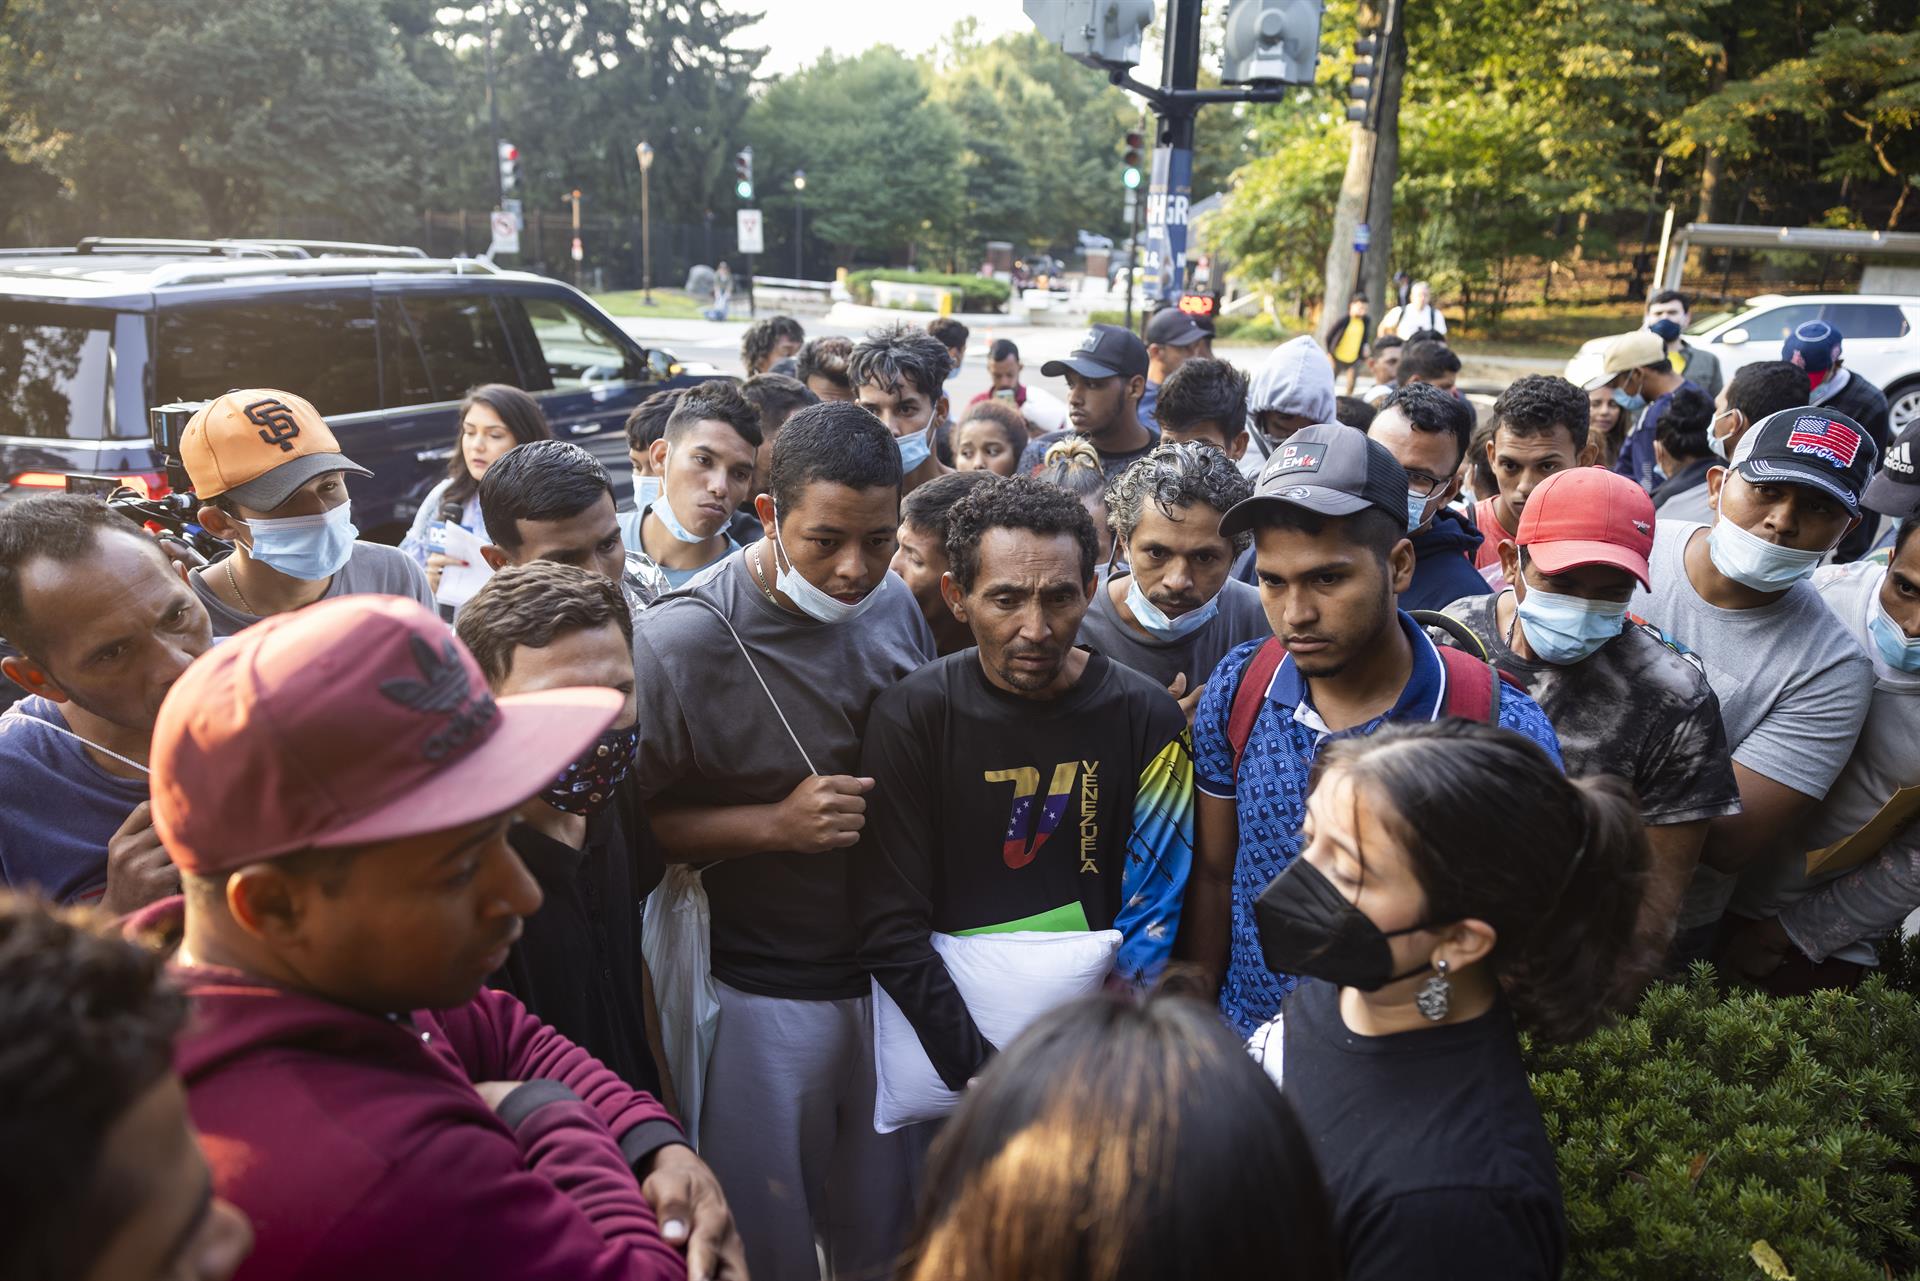 Two bus-loads of migrants from Central and South America arrive outside Vice President Kamala Harris’s residence at the Naval Observatory early in the morning in Washington, DC, USA, 15 September 2022. EPA-EFE/JIM LO SCALZO
